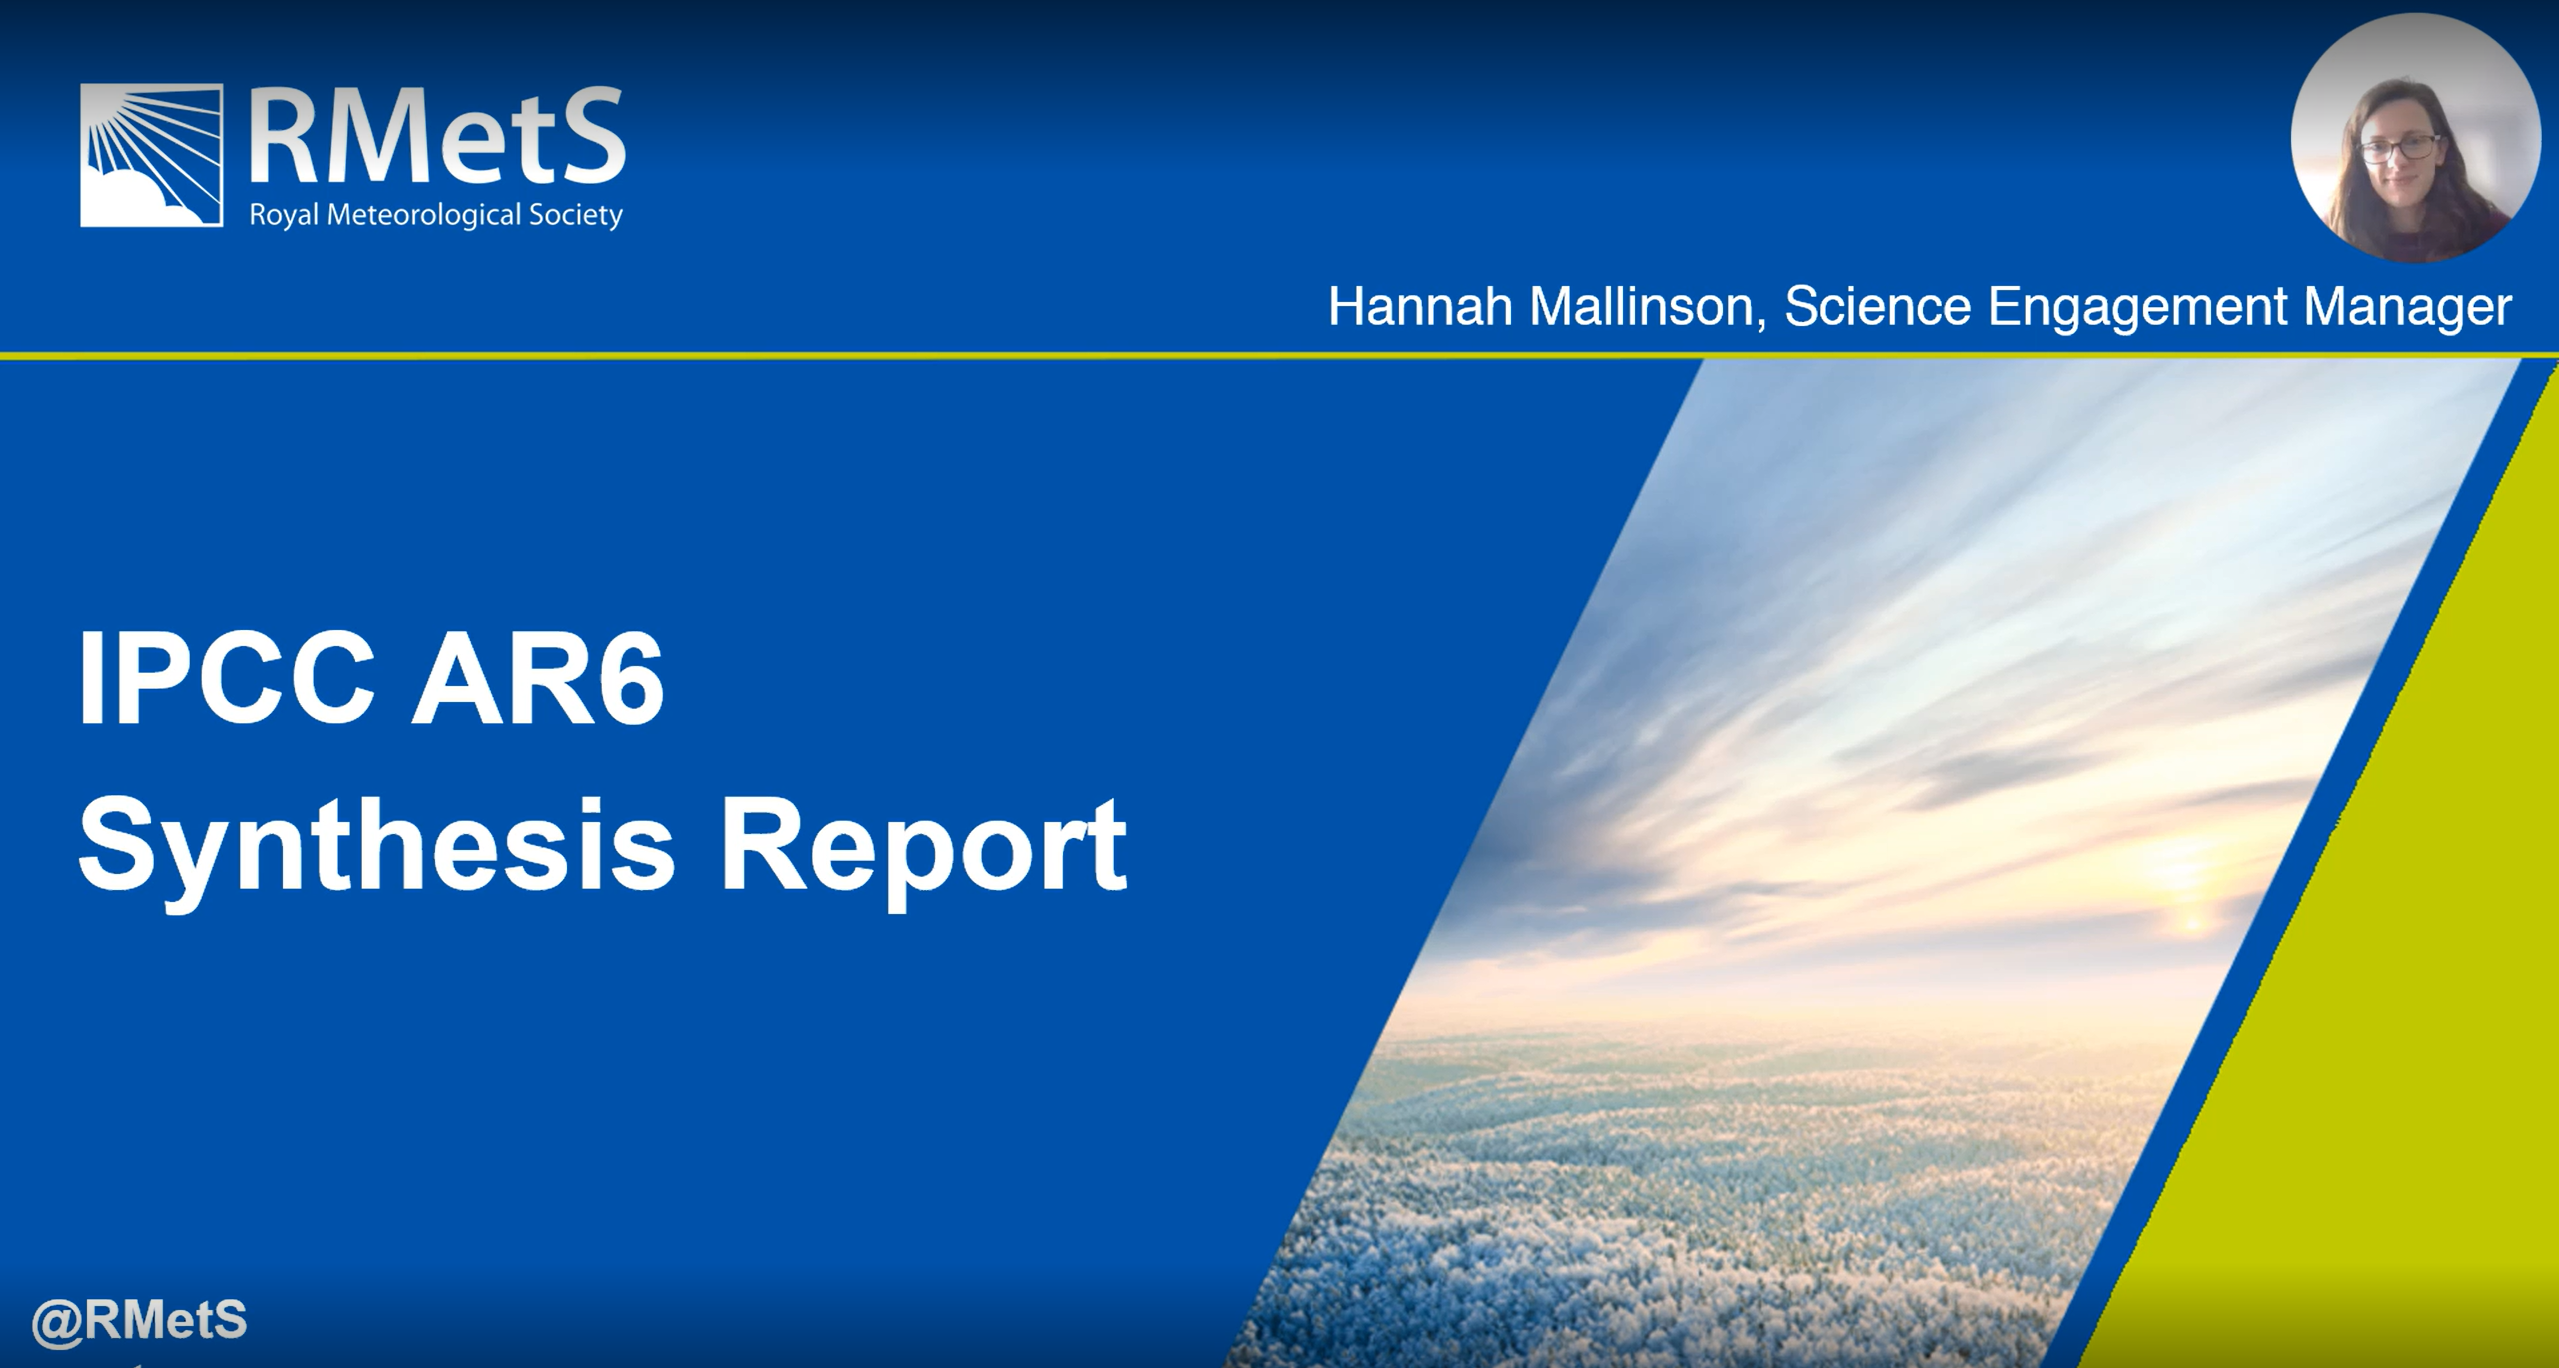 synthesis report of ipcc ar6